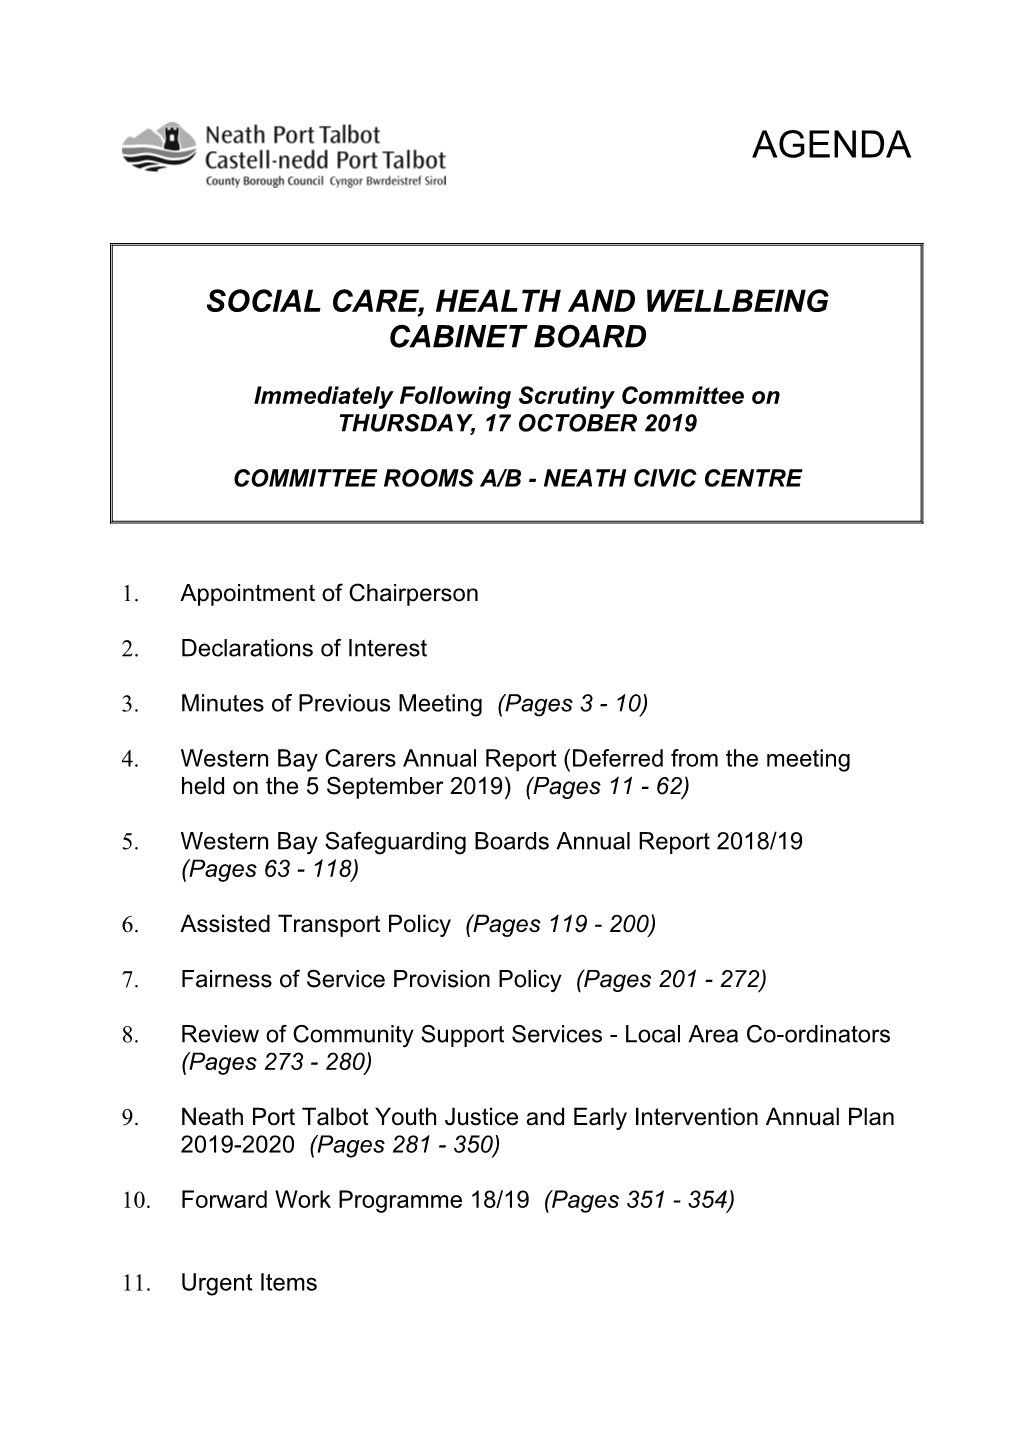 (Public Pack)Agenda Document for Social Care, Health and Wellbeing